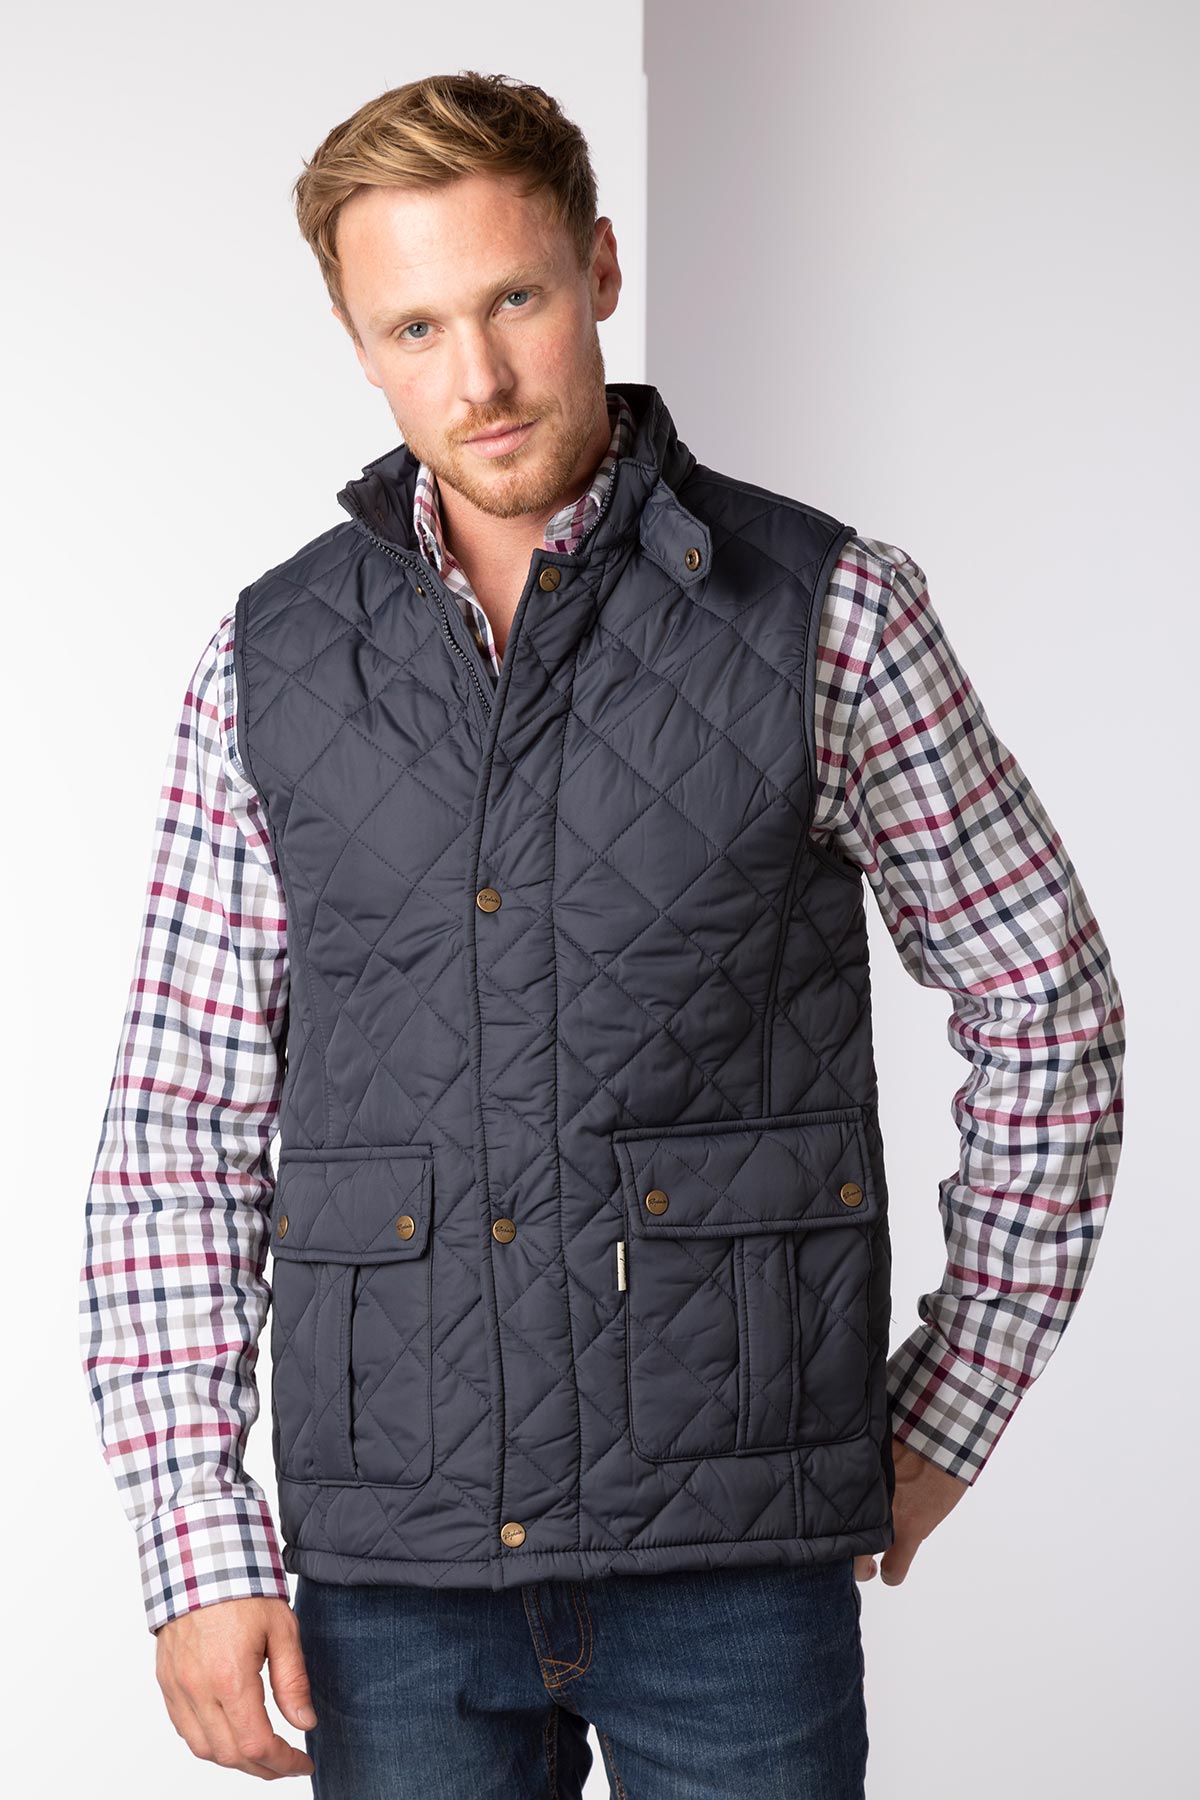 Mens Quilted Waistcoat UK | Rydale